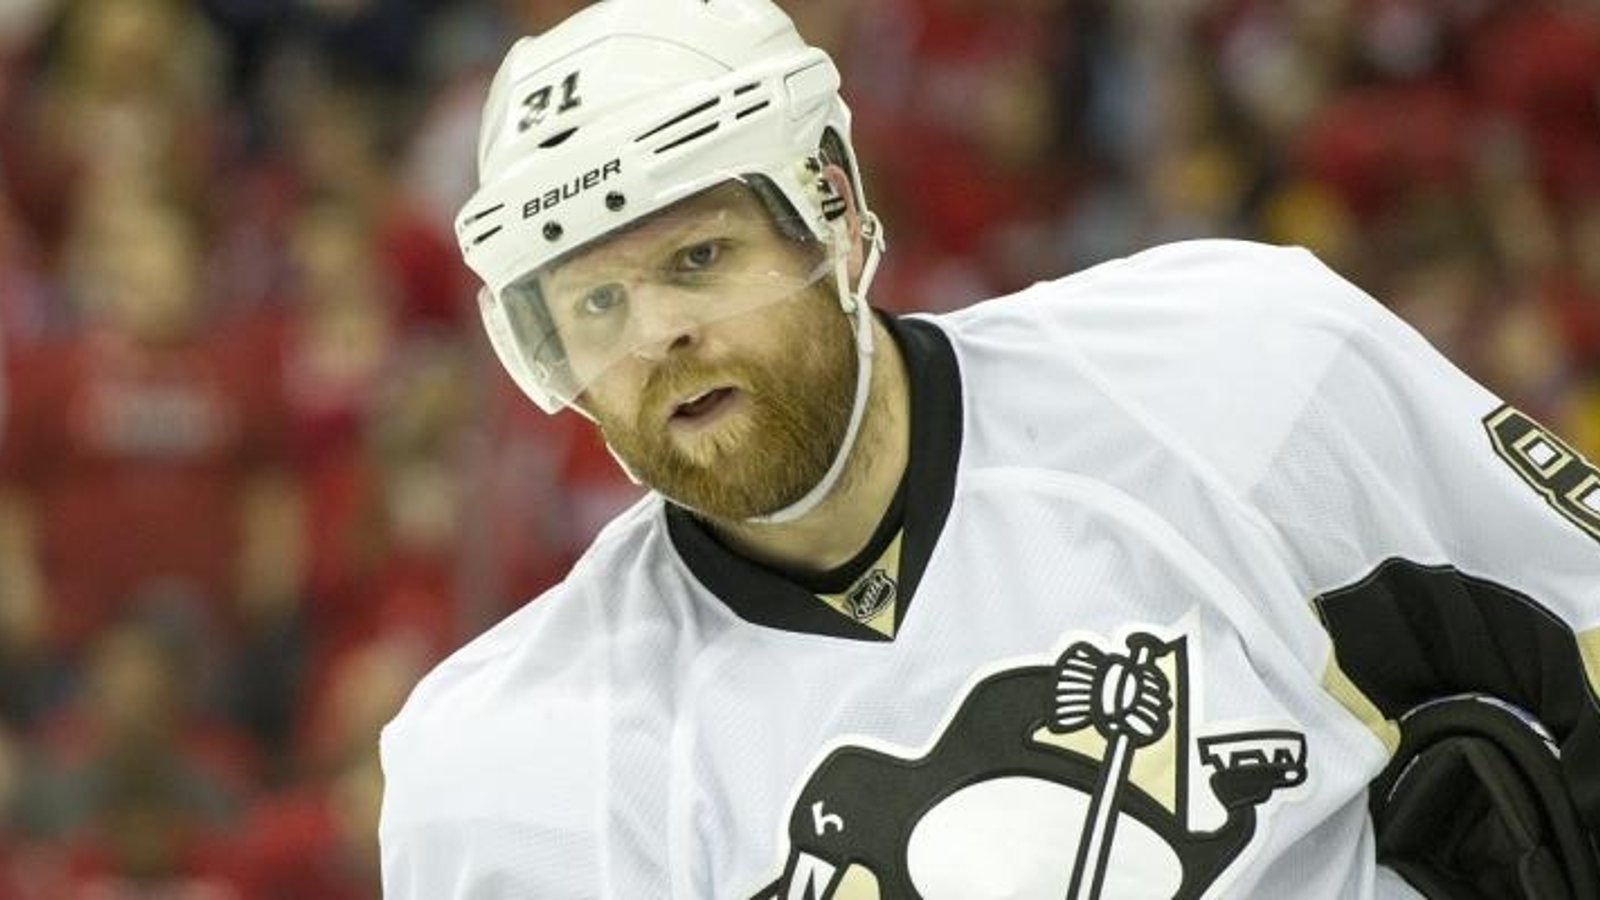 Breaking: Phil Kessel played through significant injury in playoffs, will need surgery.